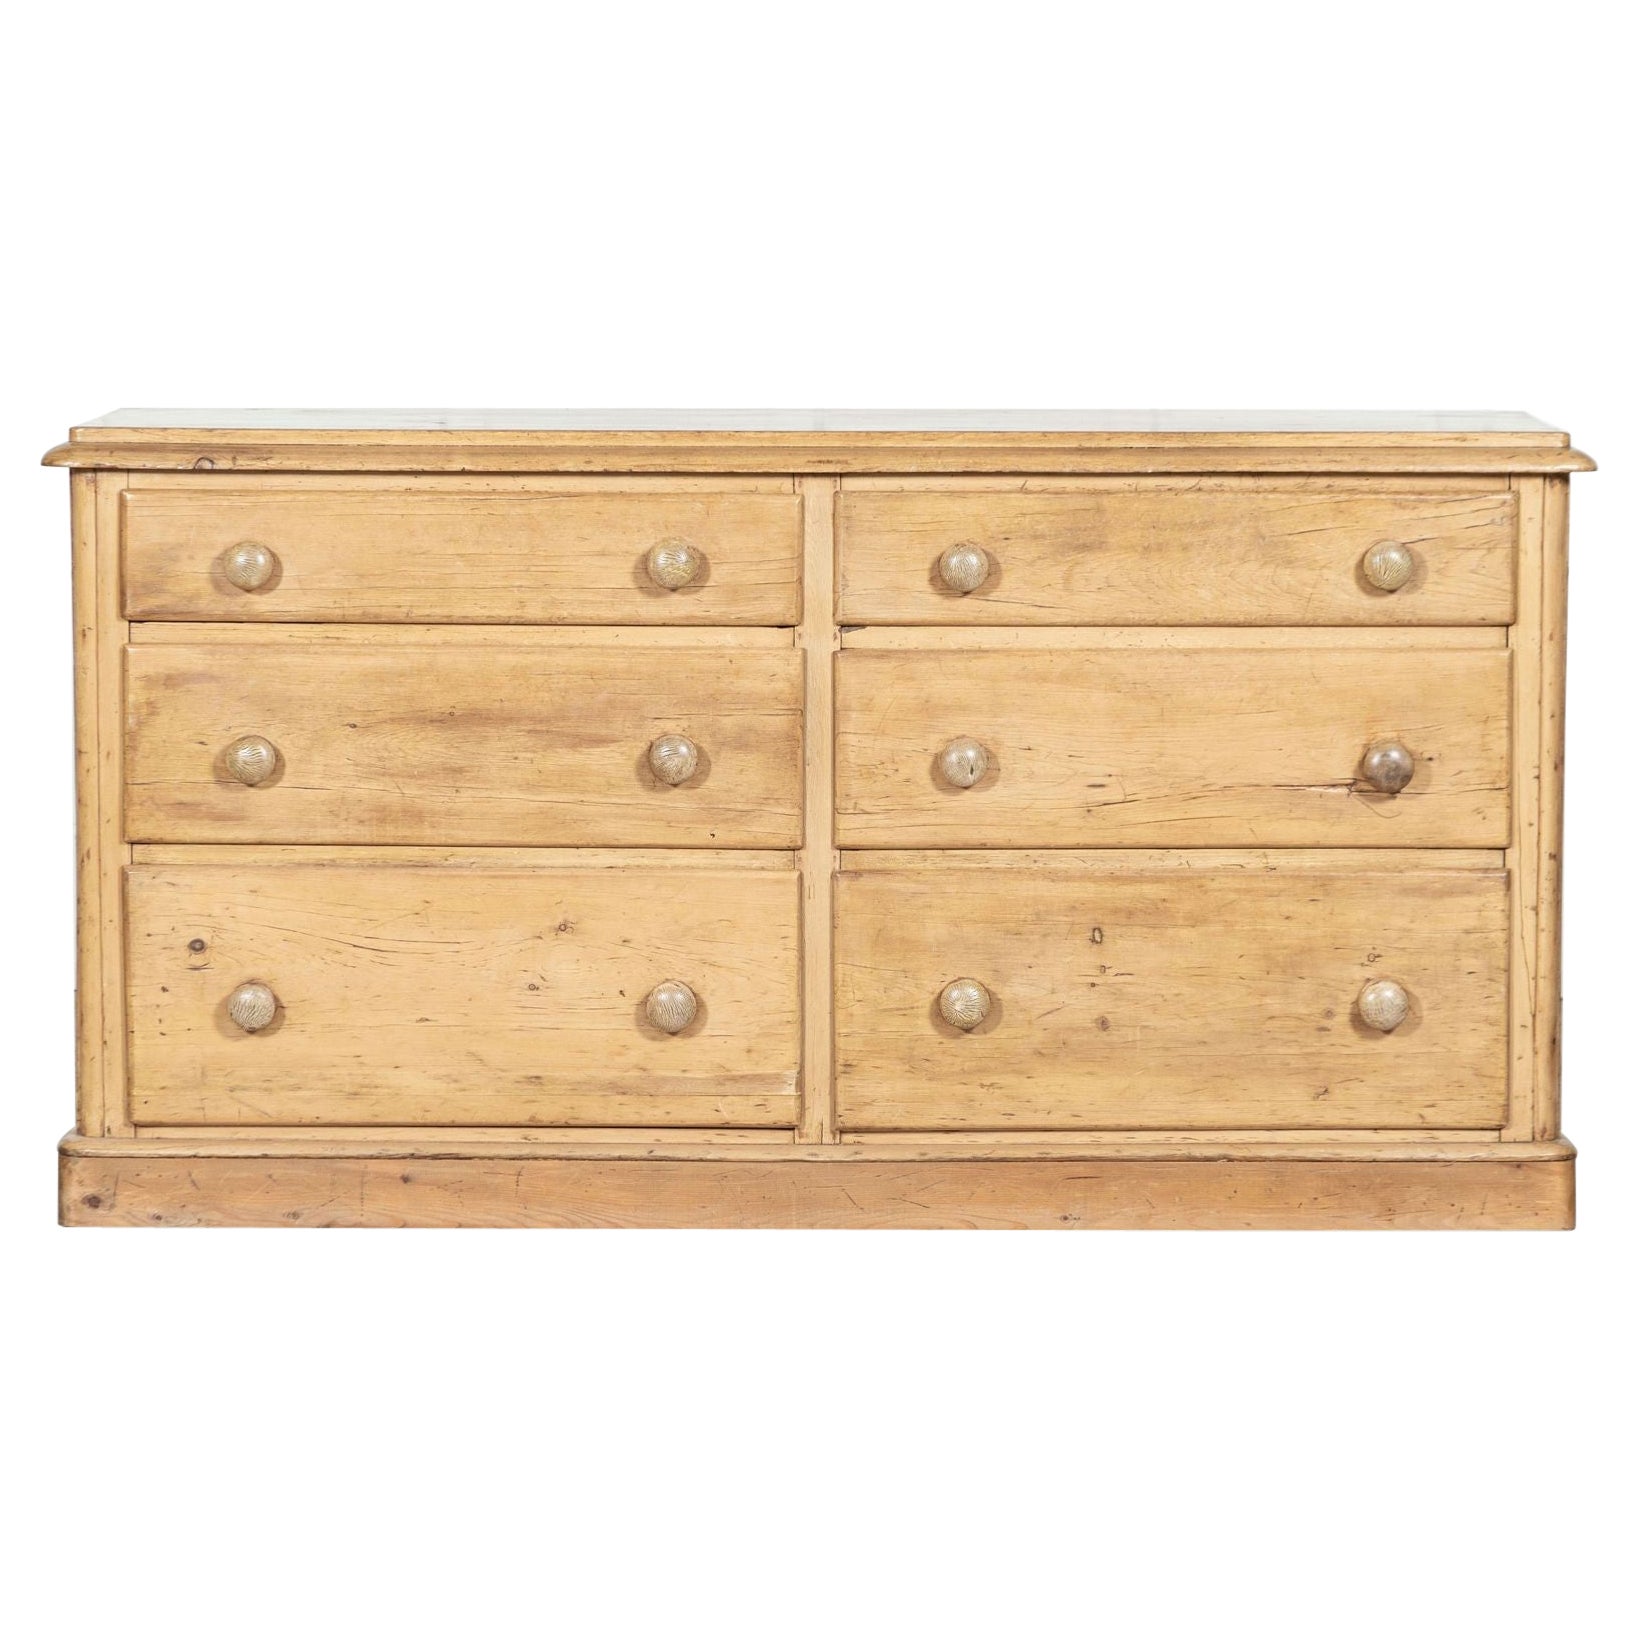 Large 19th Century English Pine Bank Drawers For Sale